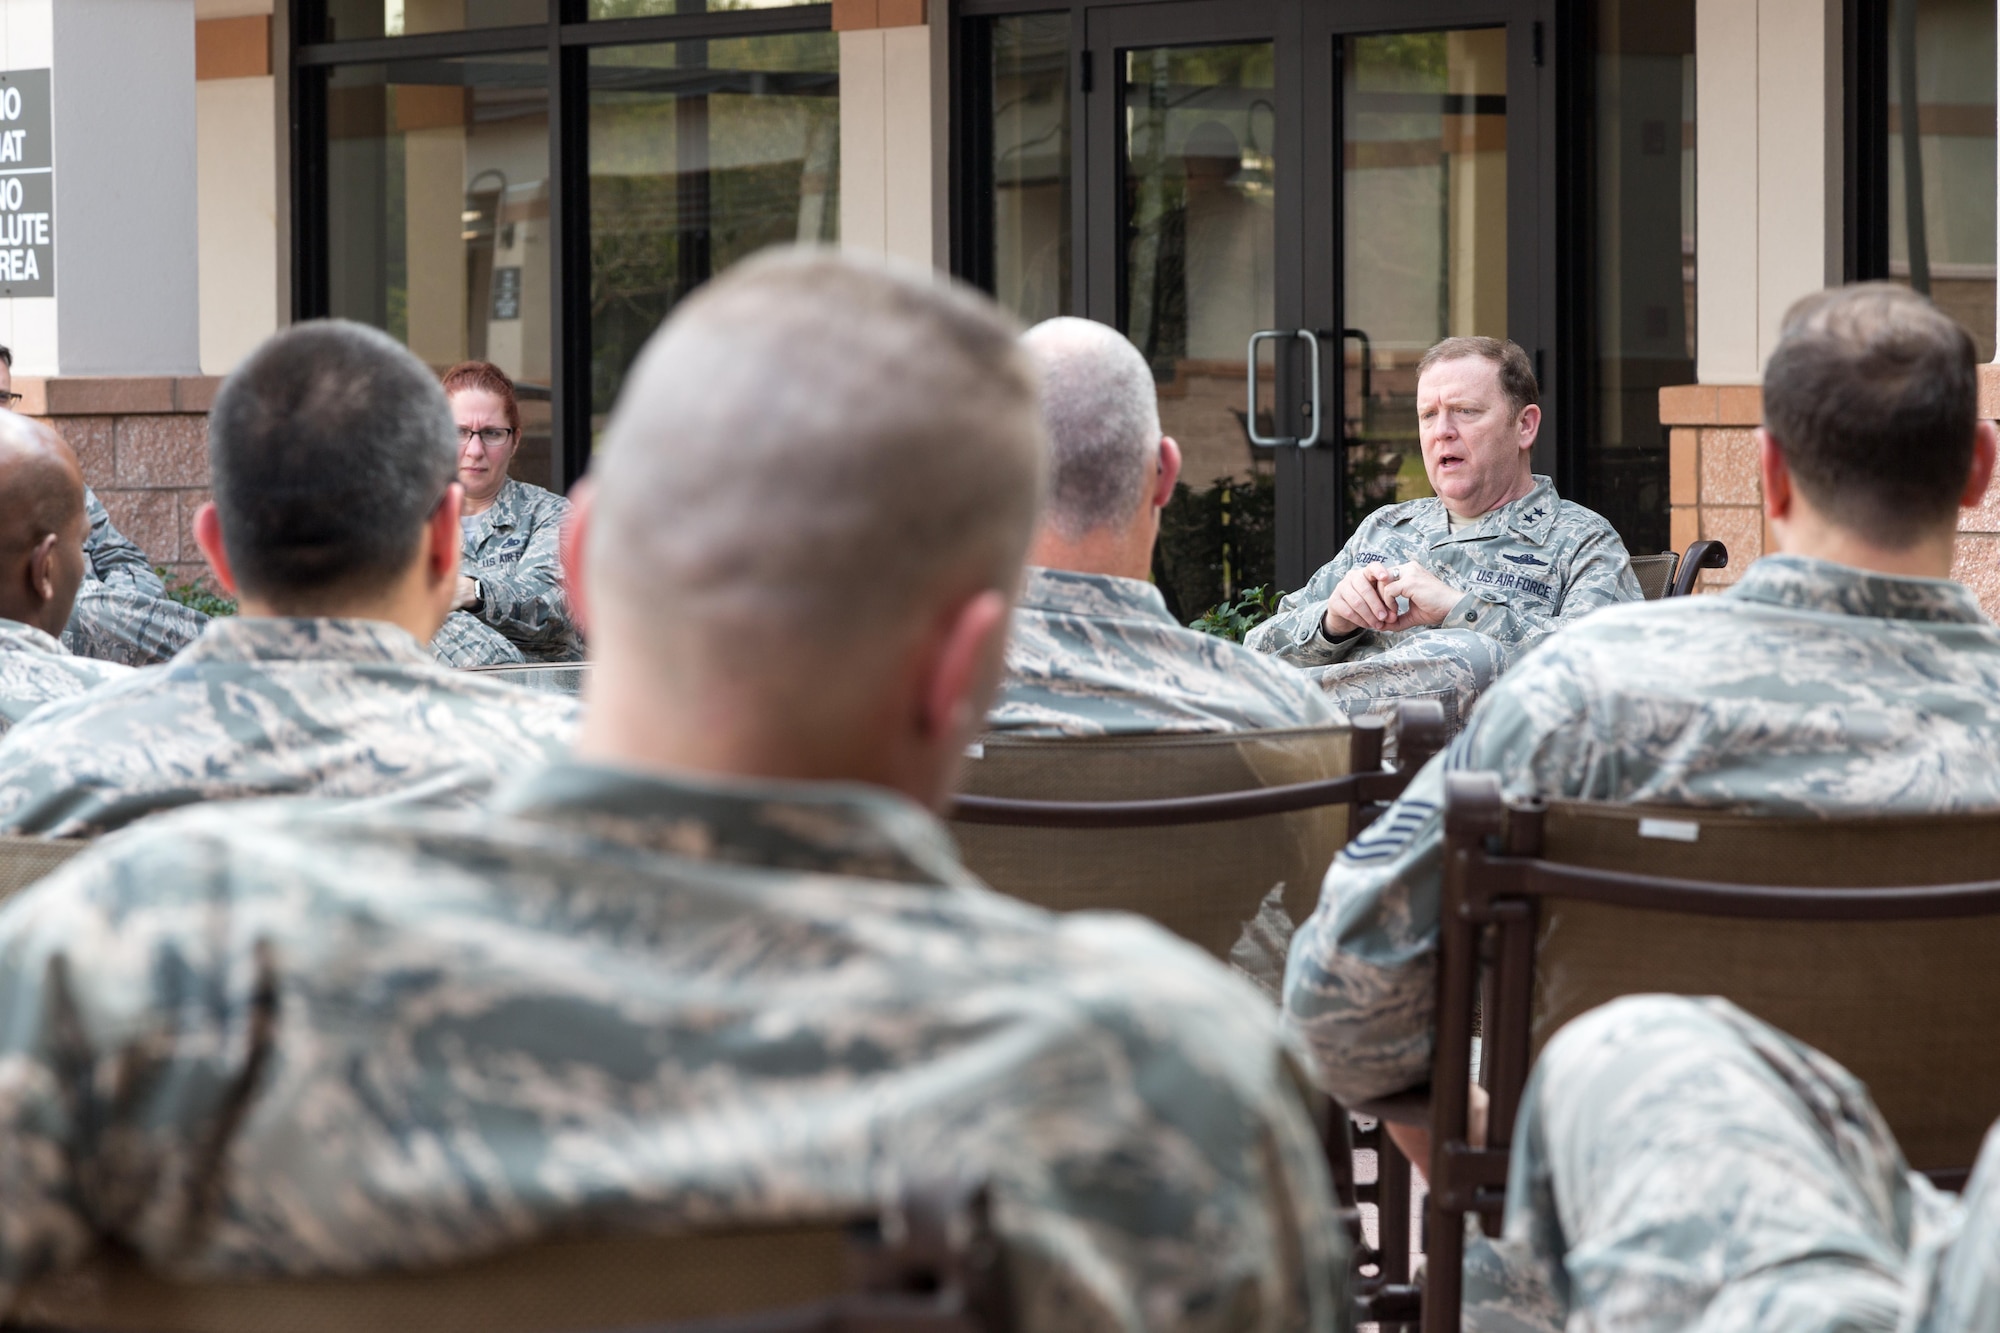 Major General Richard Scobee, Tenth Air Force Commander, sat down with the command chiefs and group superintendents to get their perspective on various issues throughout the command.